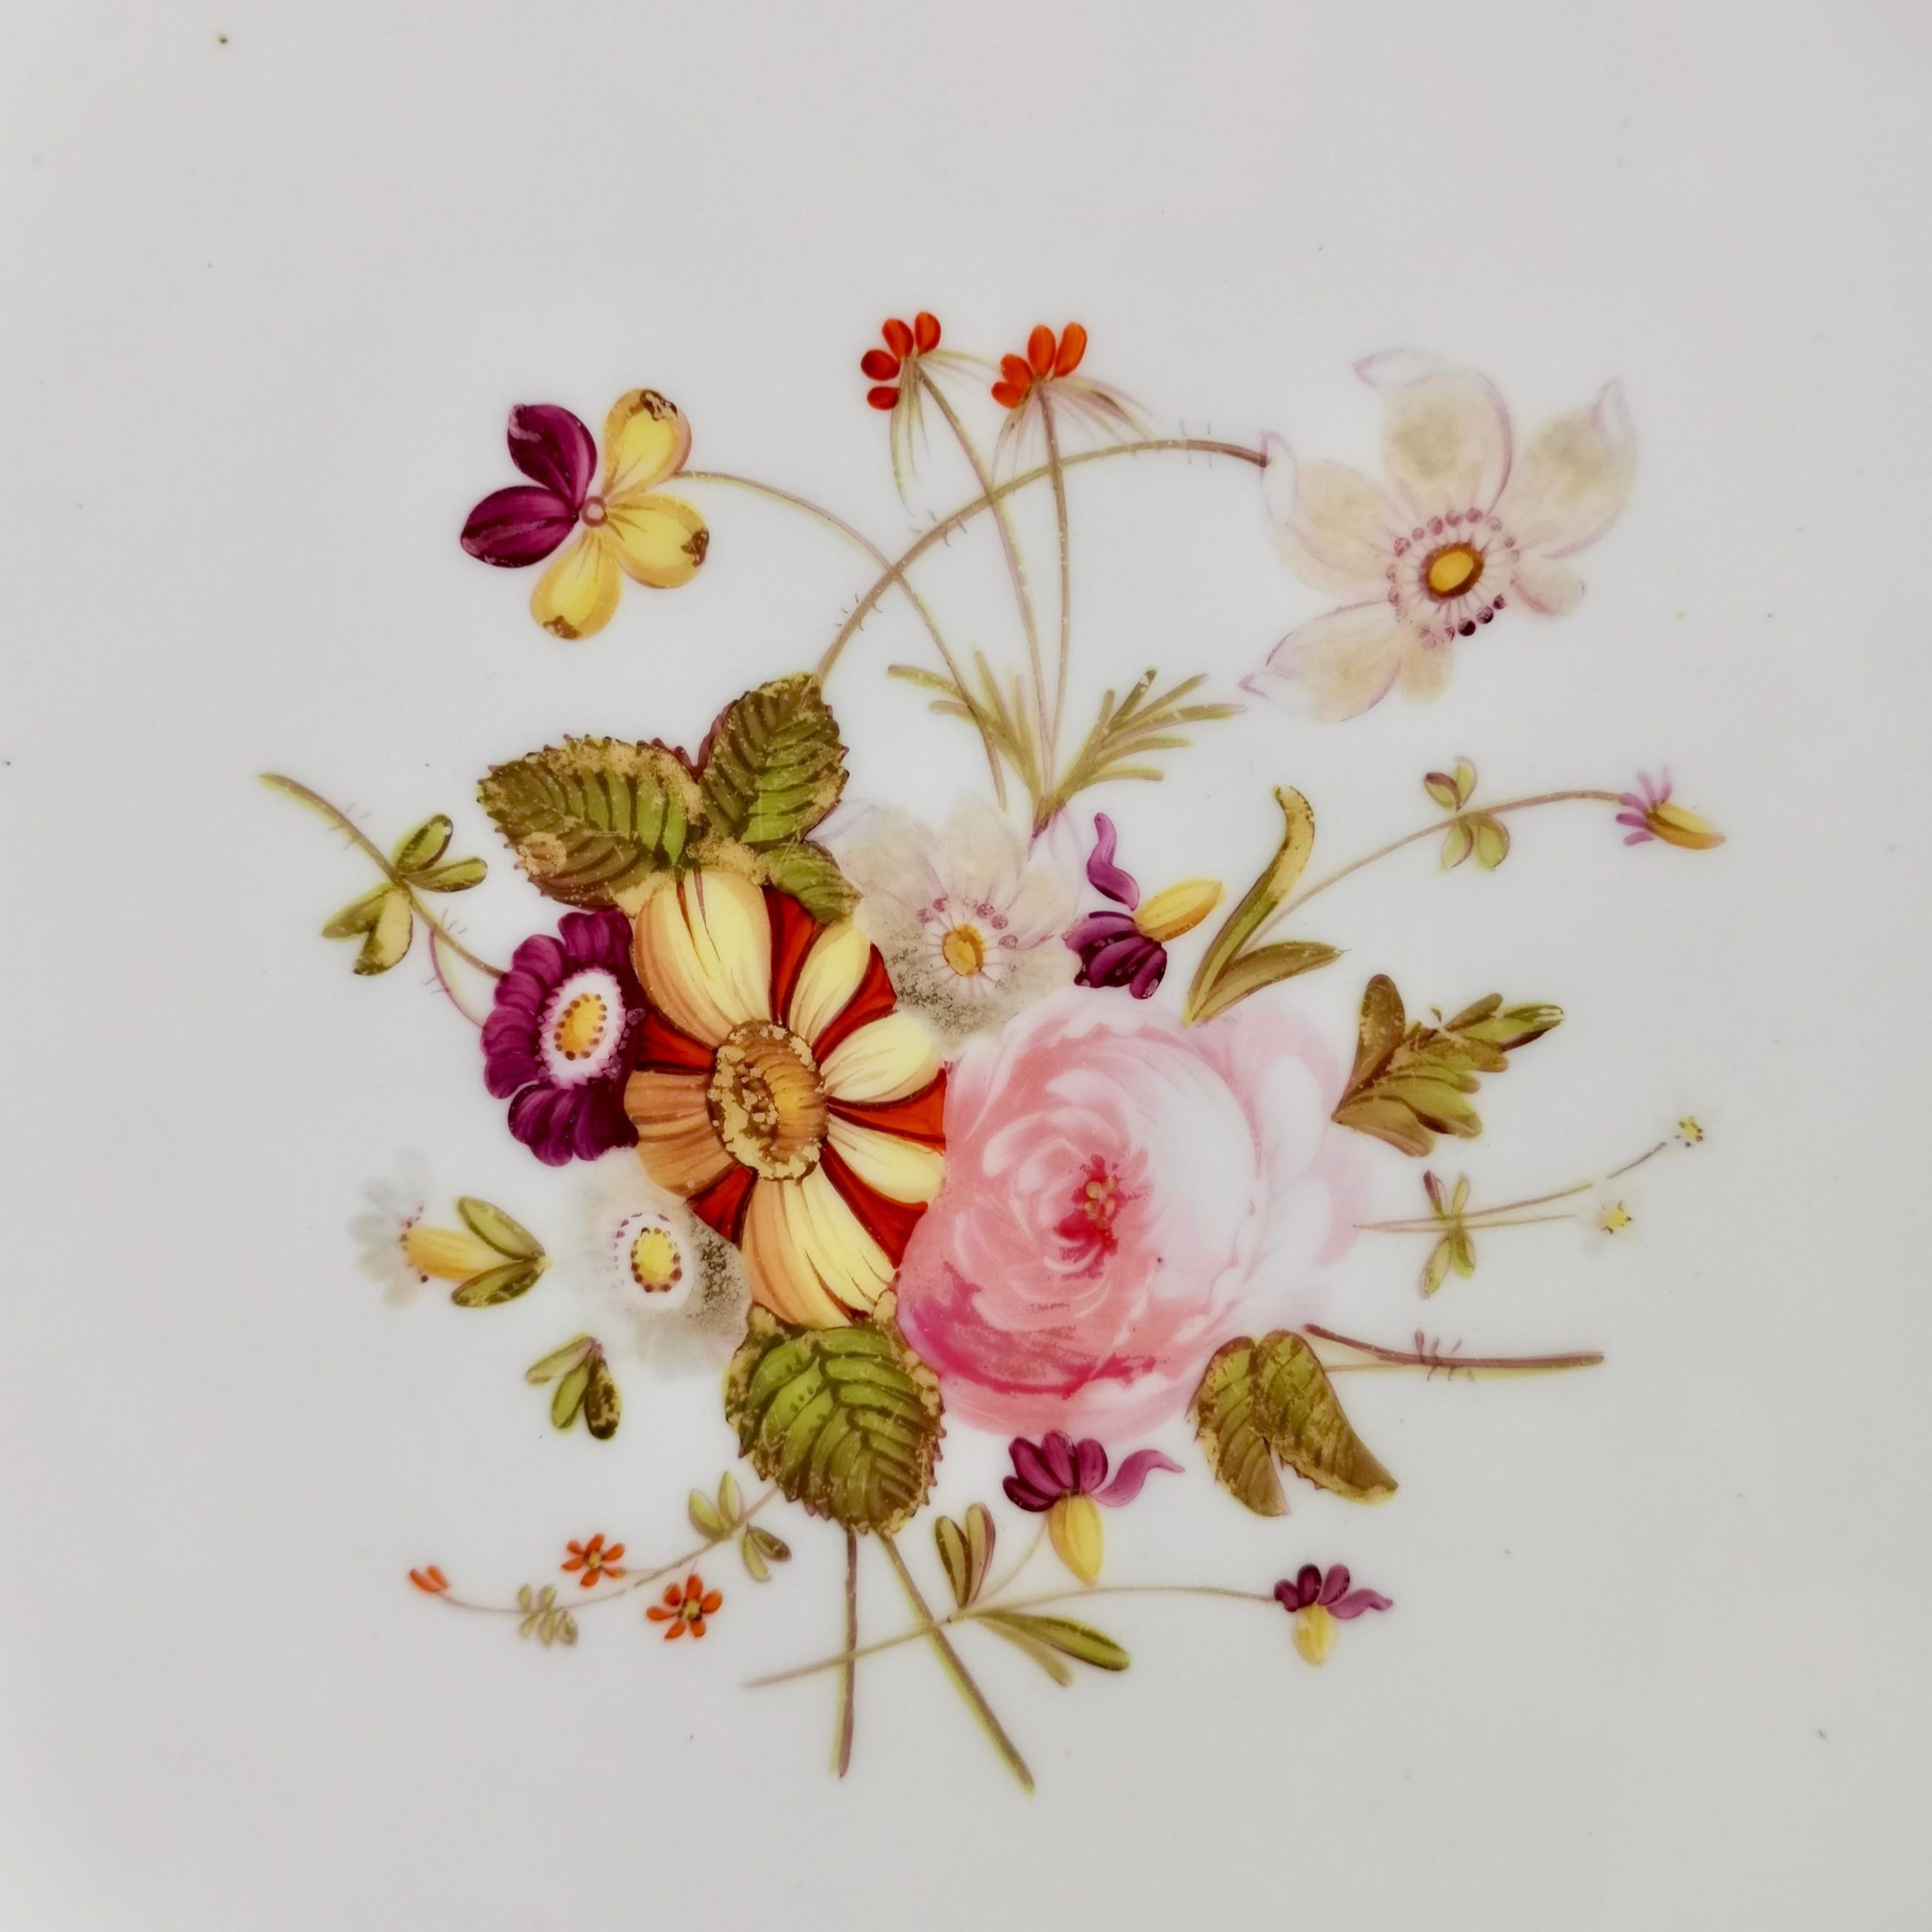 This is a beautiful dessert plate made by Coalport in 1827, which was the Regency era. The plate has a beautifully moulded rim, a bright blue ground and hand painted flower reserves.

Coalport was one of the leading potters in 19th and 20th